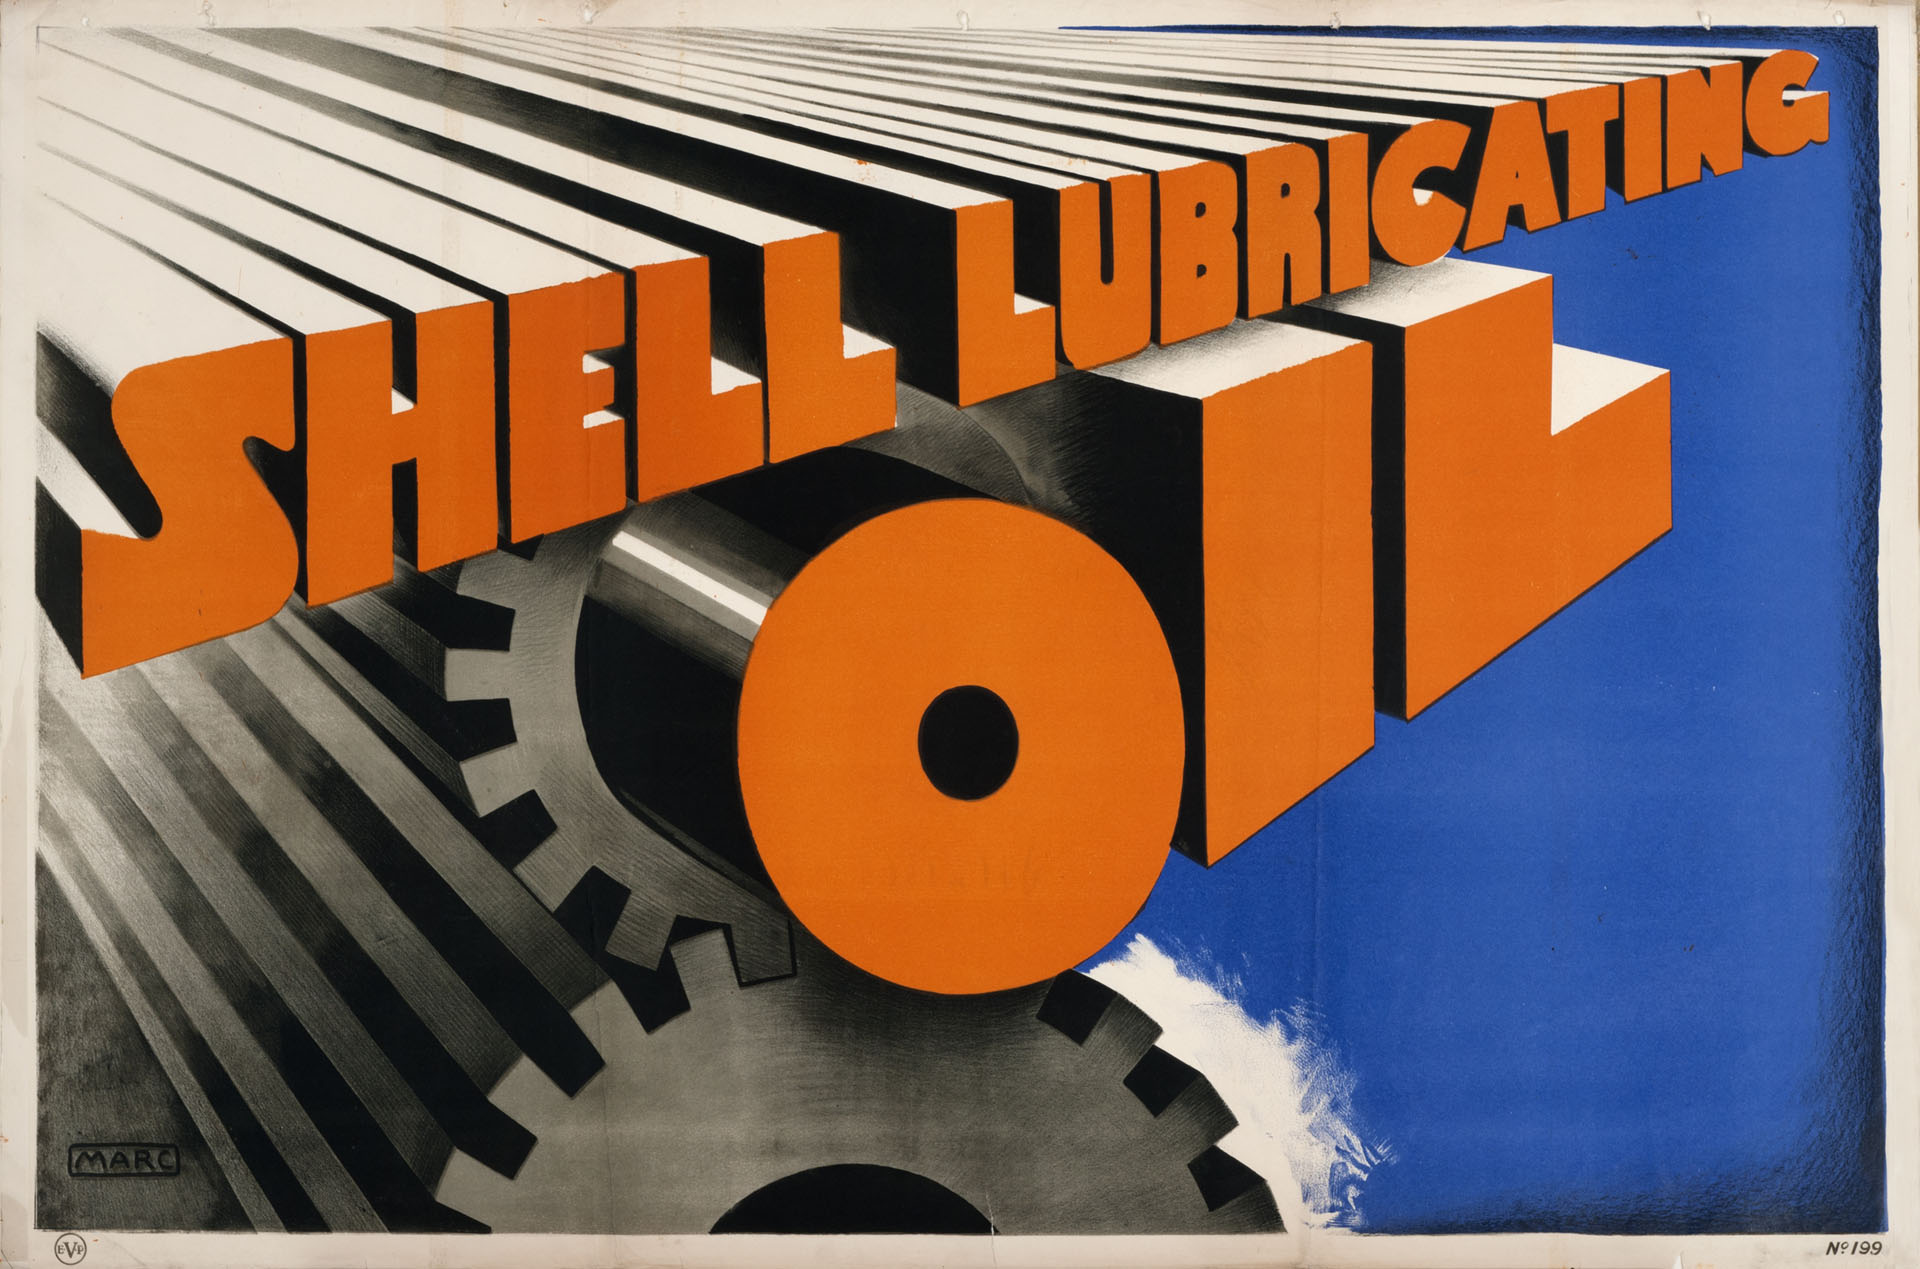 Poster of Shell Lubricating Oil by  Marc, 1928